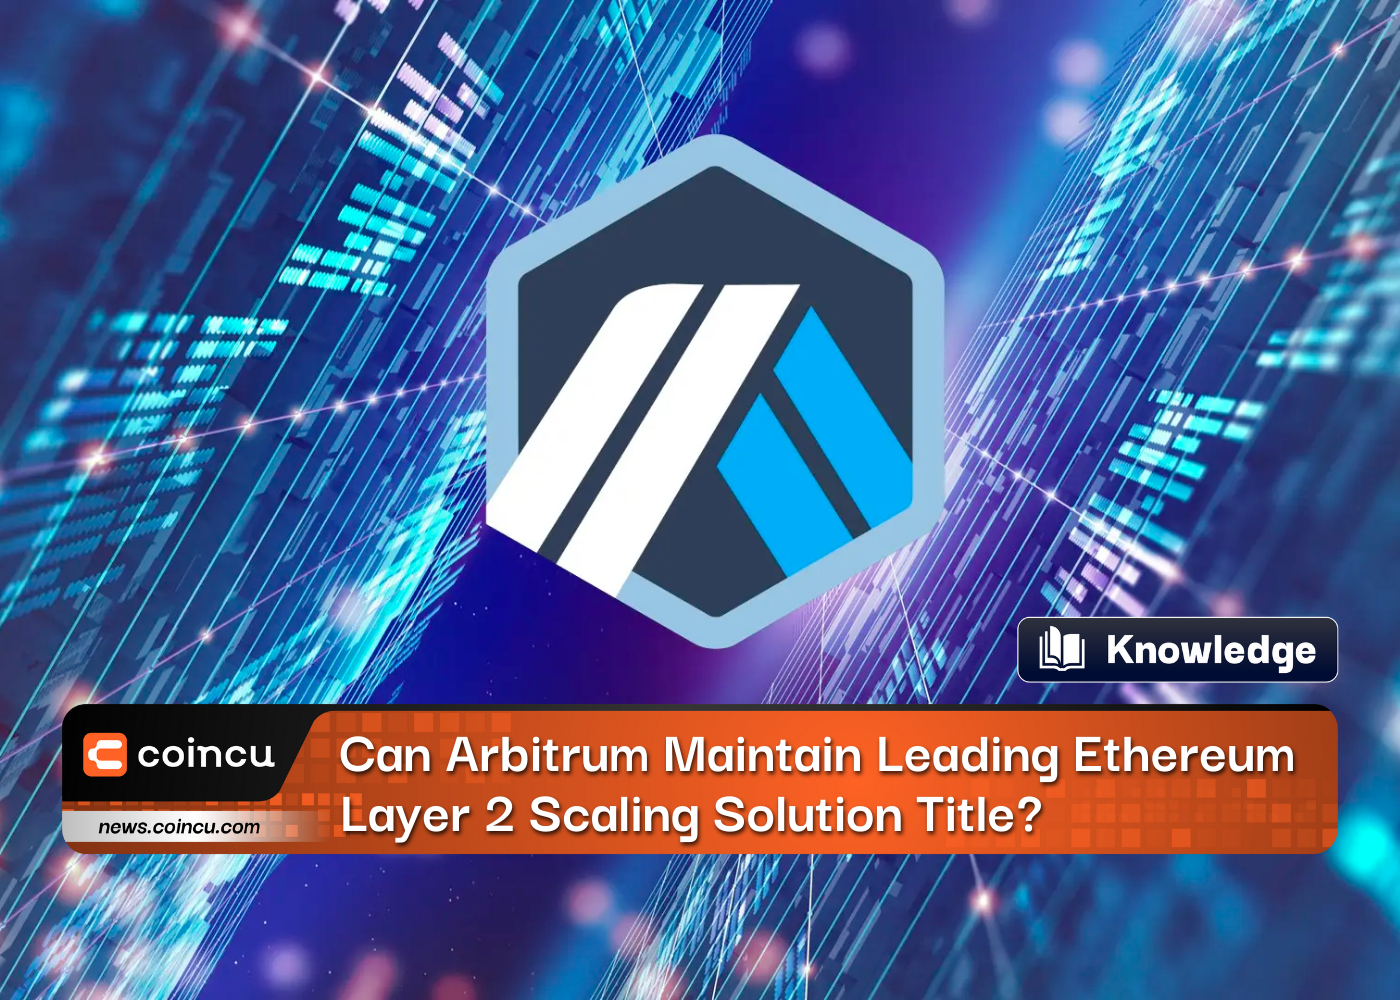 Can Arbitrum Maintain Leading Ethereum Layer-2 Scaling Solution Title?